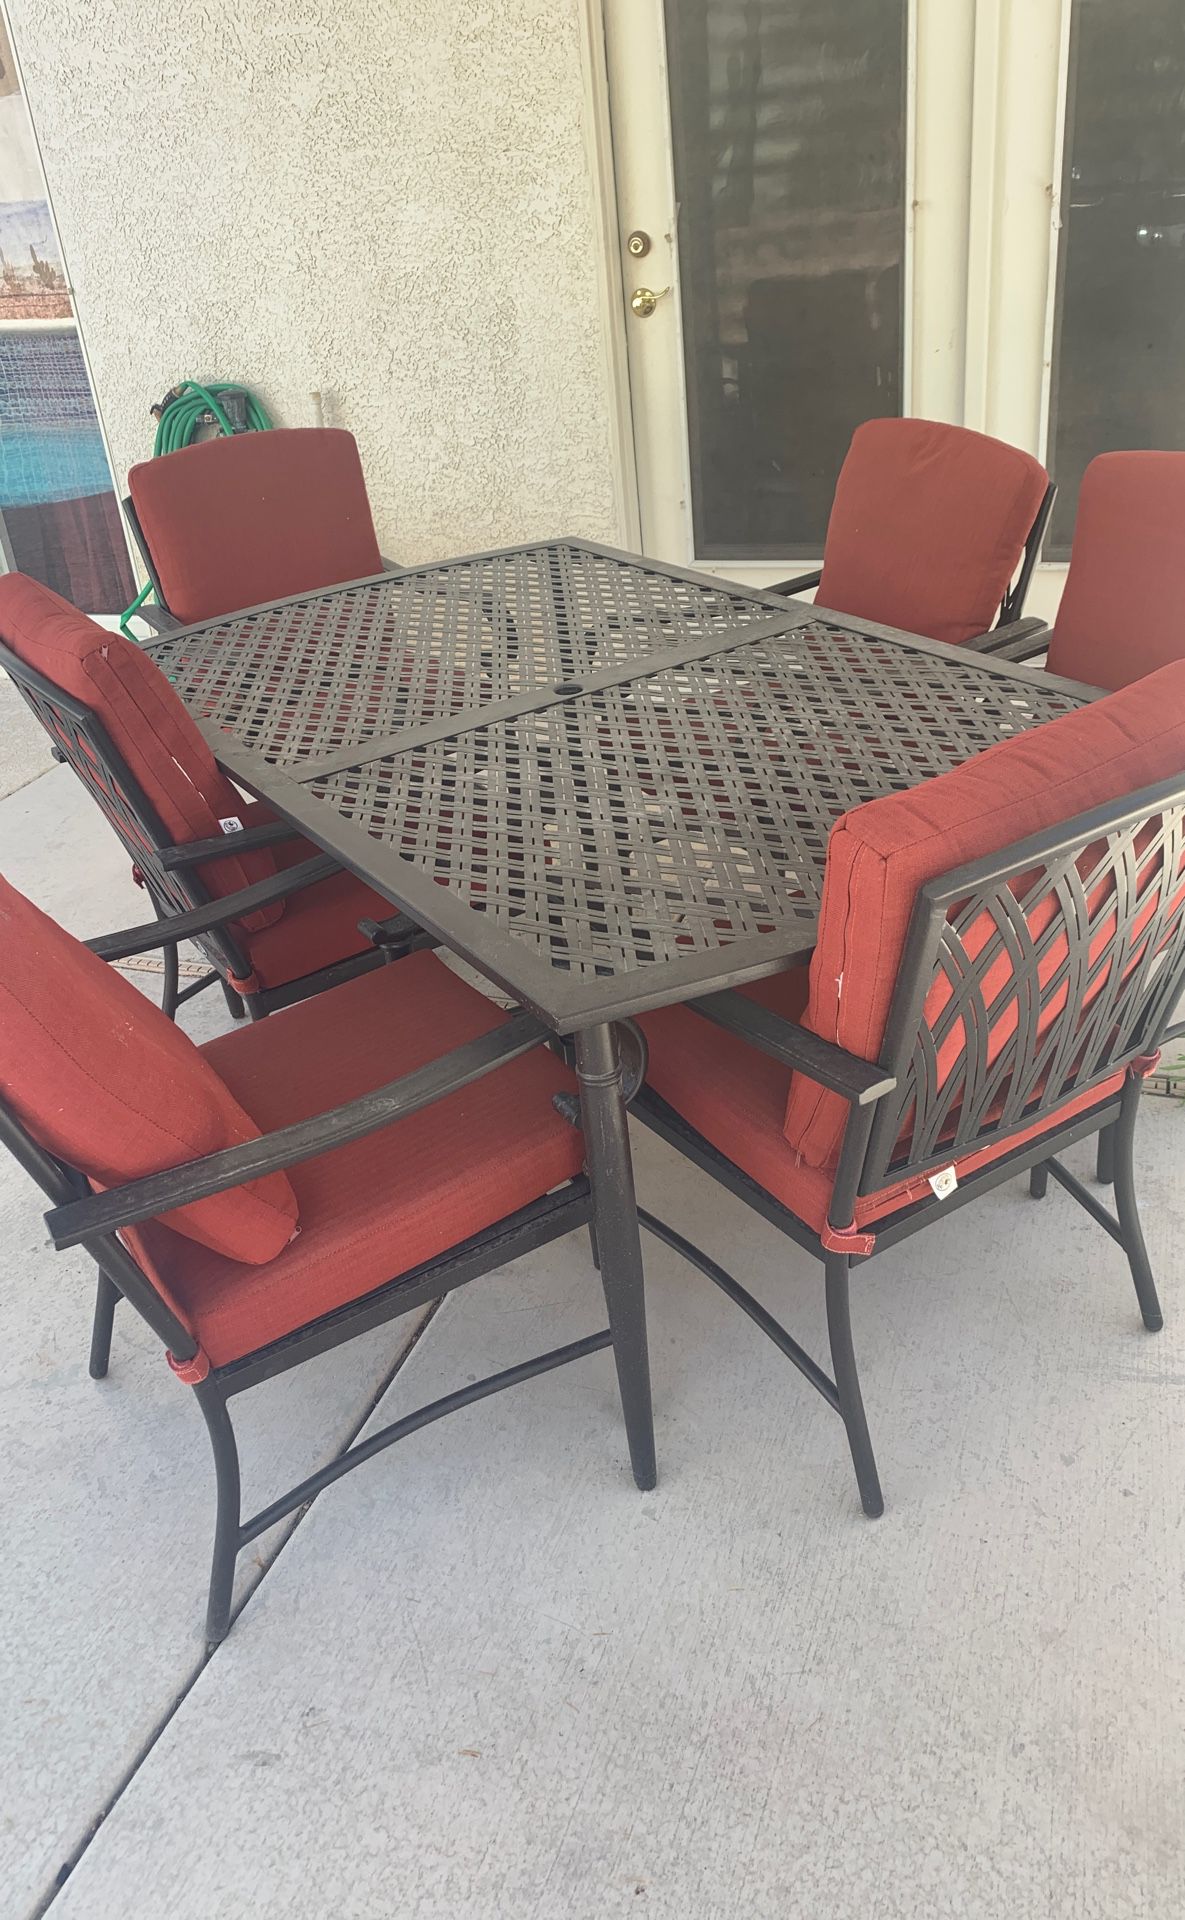 Patio furniture with never used fire pit